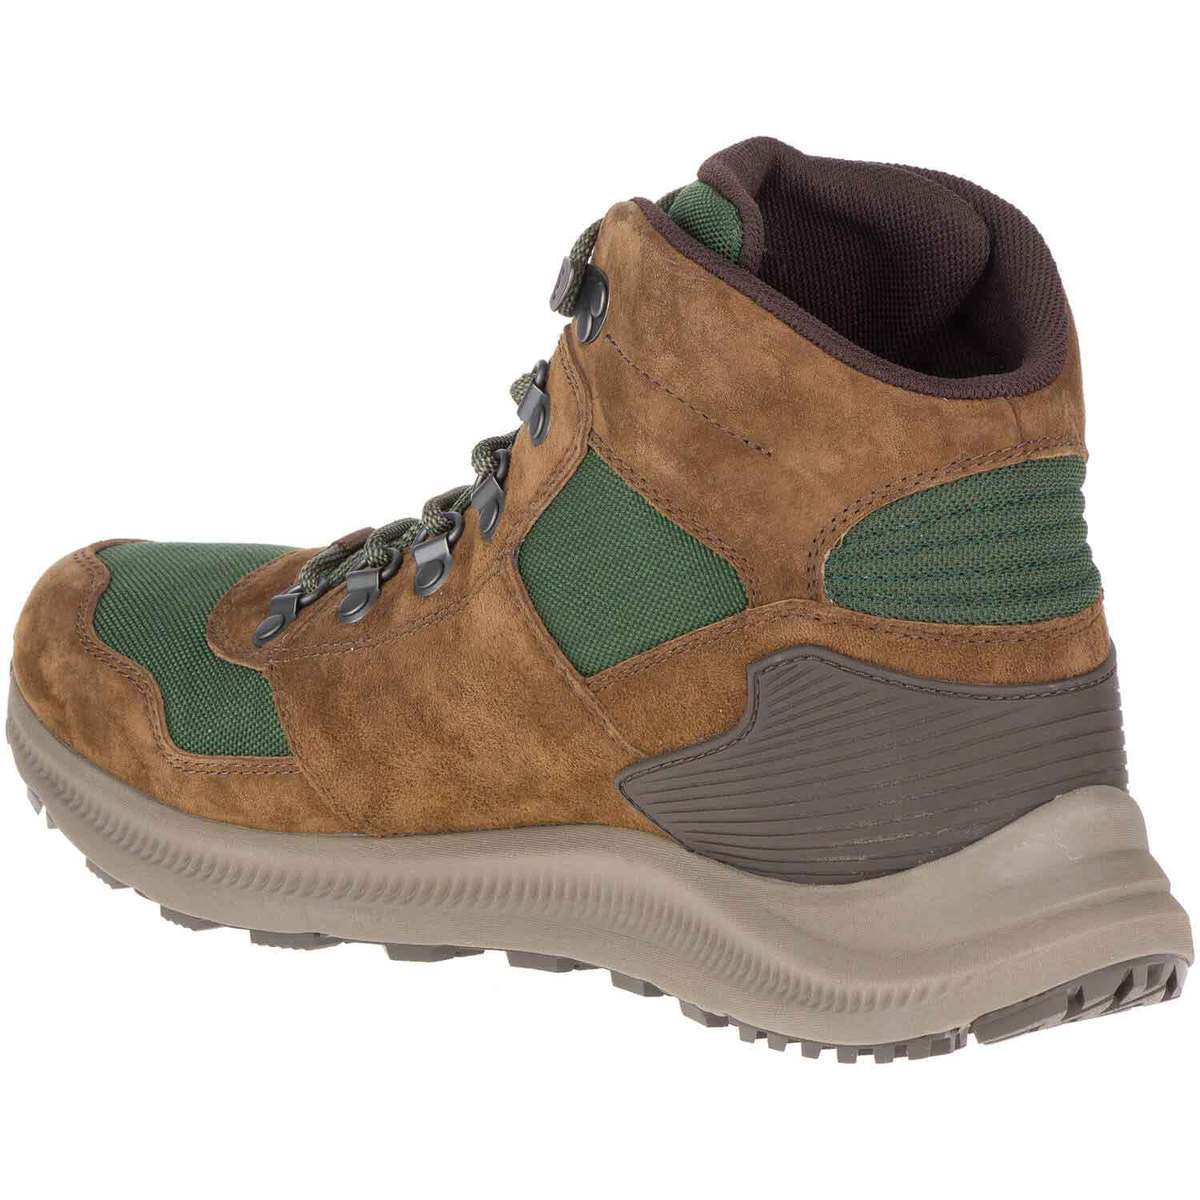 Merrell Men's Ontario 85 Waterproof Mid Hiking Boots - Forest - Size 13 ...